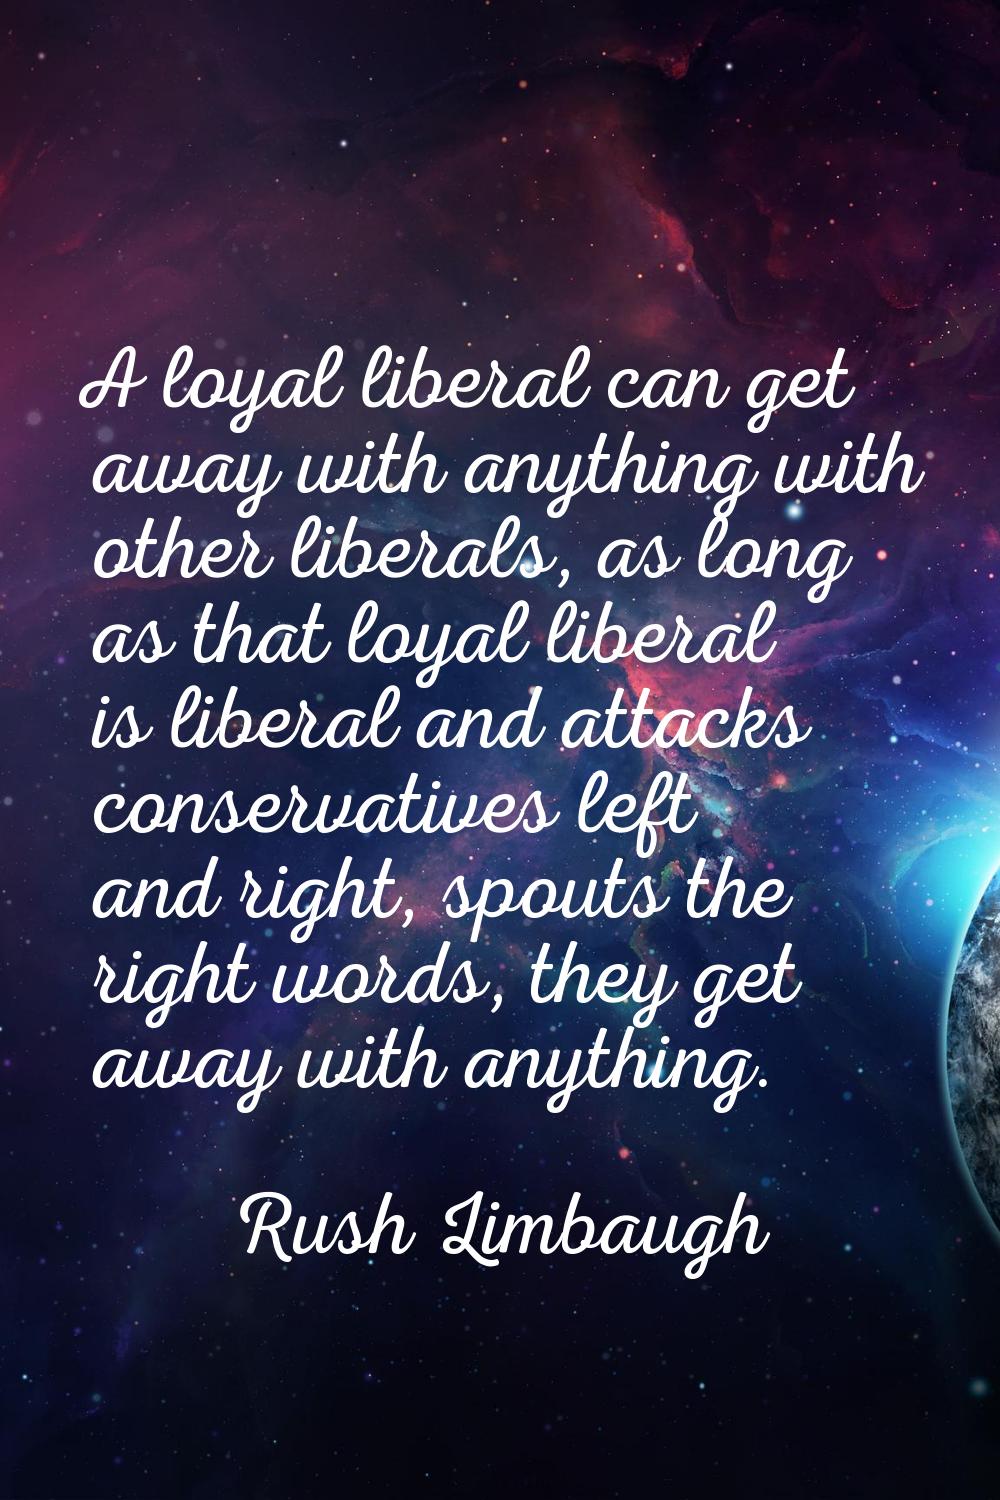 A loyal liberal can get away with anything with other liberals, as long as that loyal liberal is li